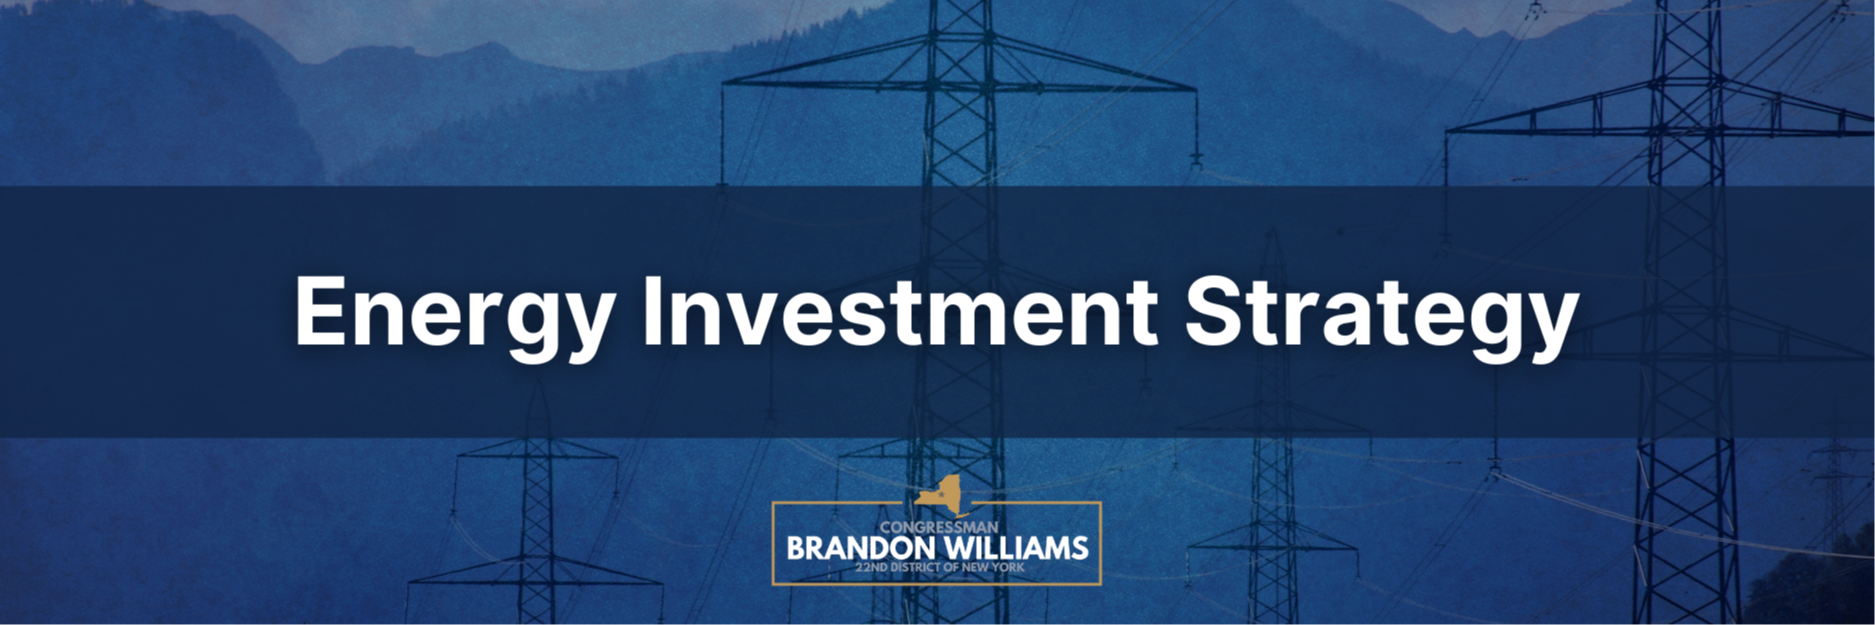 Rep. Williams Energy Investment Strategy